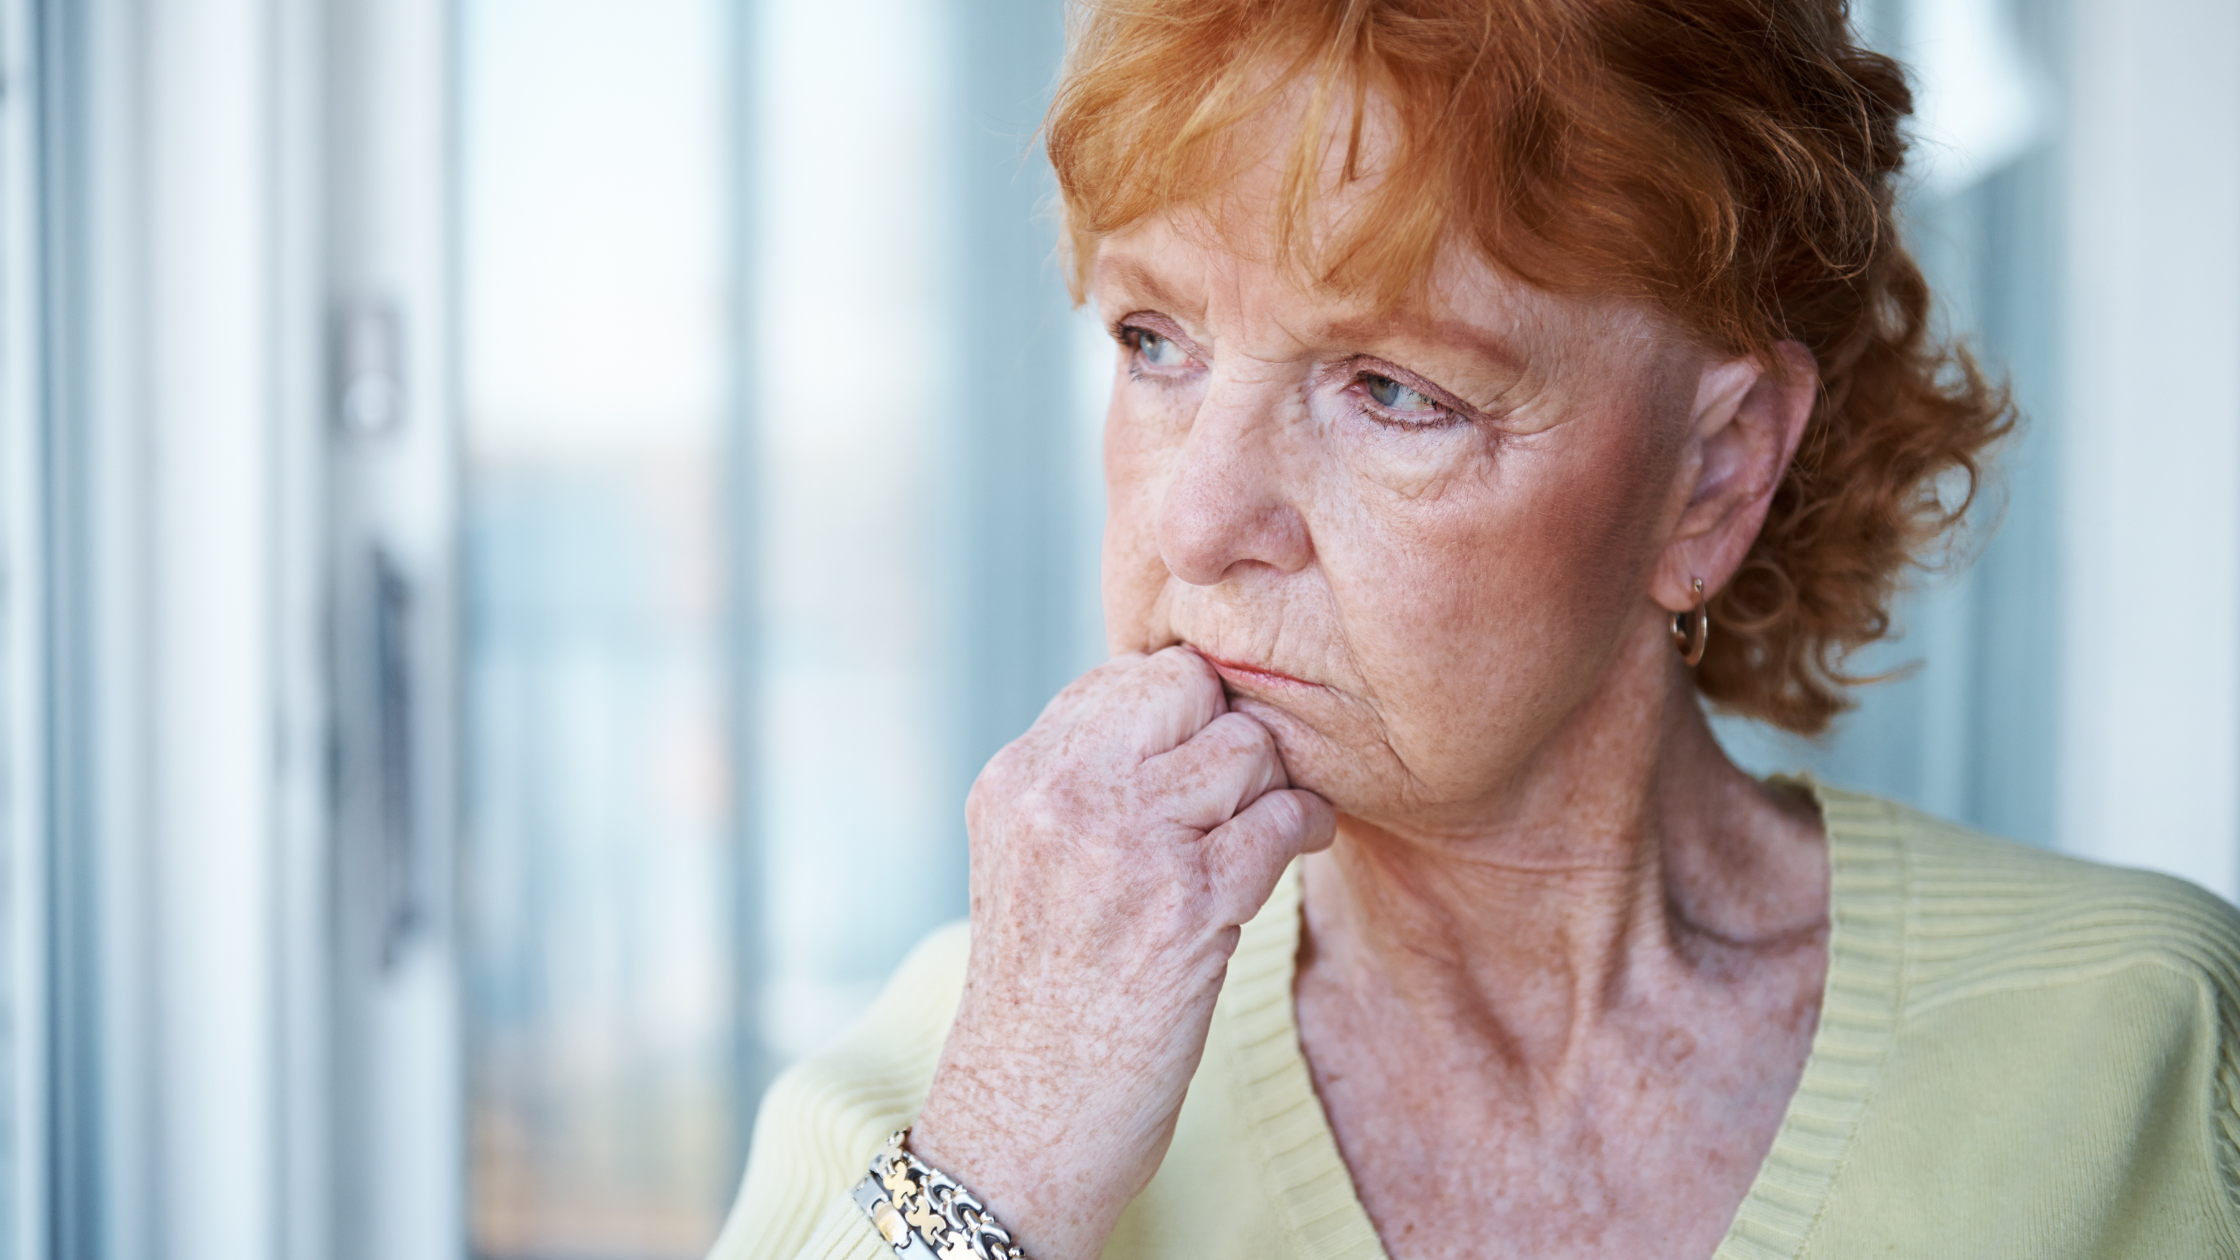 How To Deal With Senior Loneliness